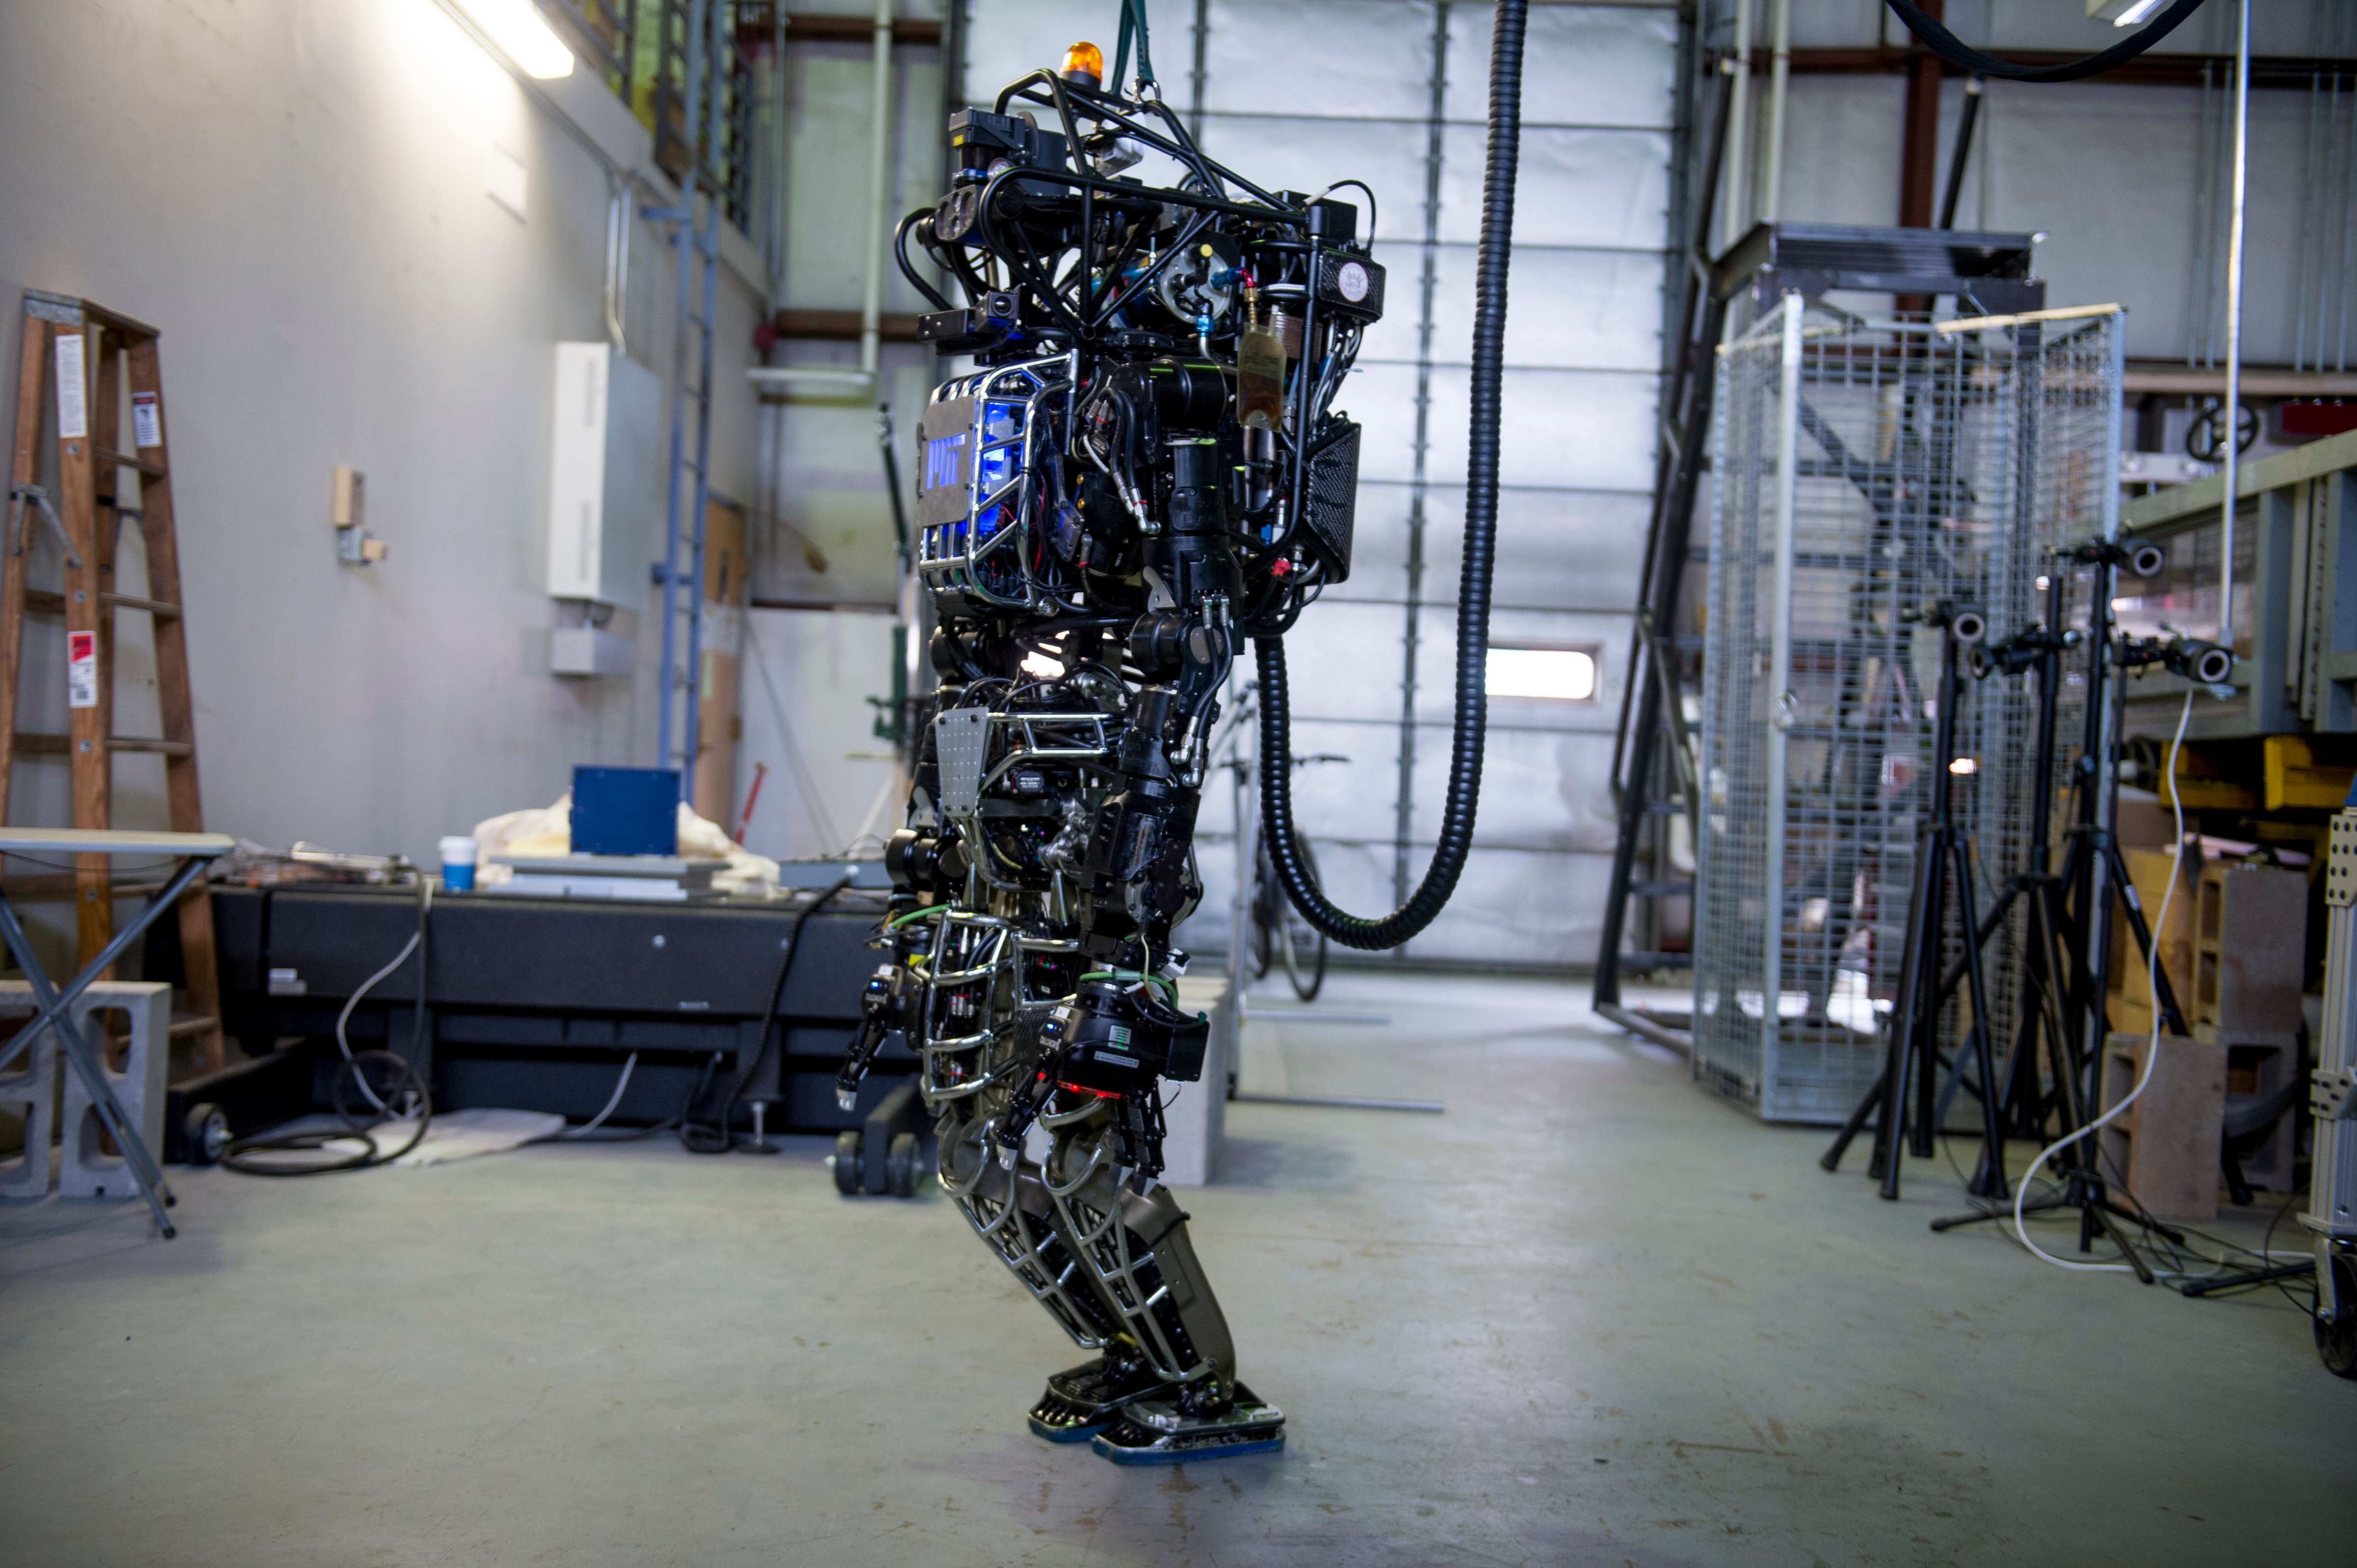 The capabilities of the Atlas robot are demonstrated during the Massachusetts Institute of Technology's Computer Science and Artificial Intelligence Laboratory's Demo Day on April 6, 2013 in Boston, Massachusetts. (Christian Science Monitor—Christian Science Monitor/Getty Images)